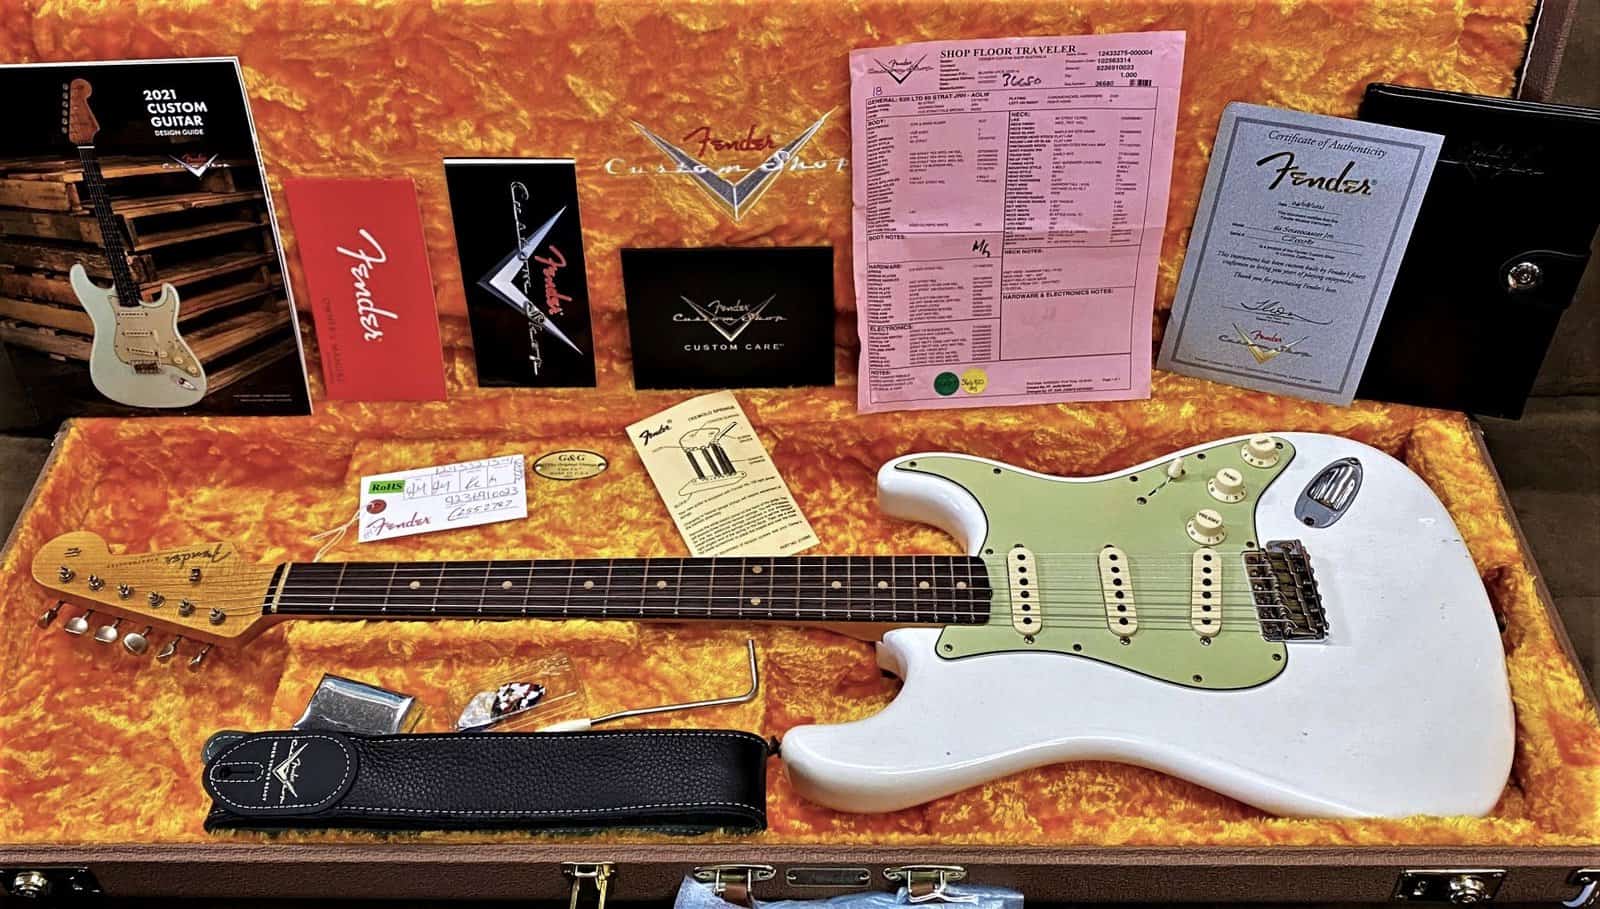 White　Olympic　Custom　Journeyman　Relic　Sold　Aged　Board,　Shop,　Rosewood　Black　1960　Stratocaster　Fender　AAA　Dot　Music